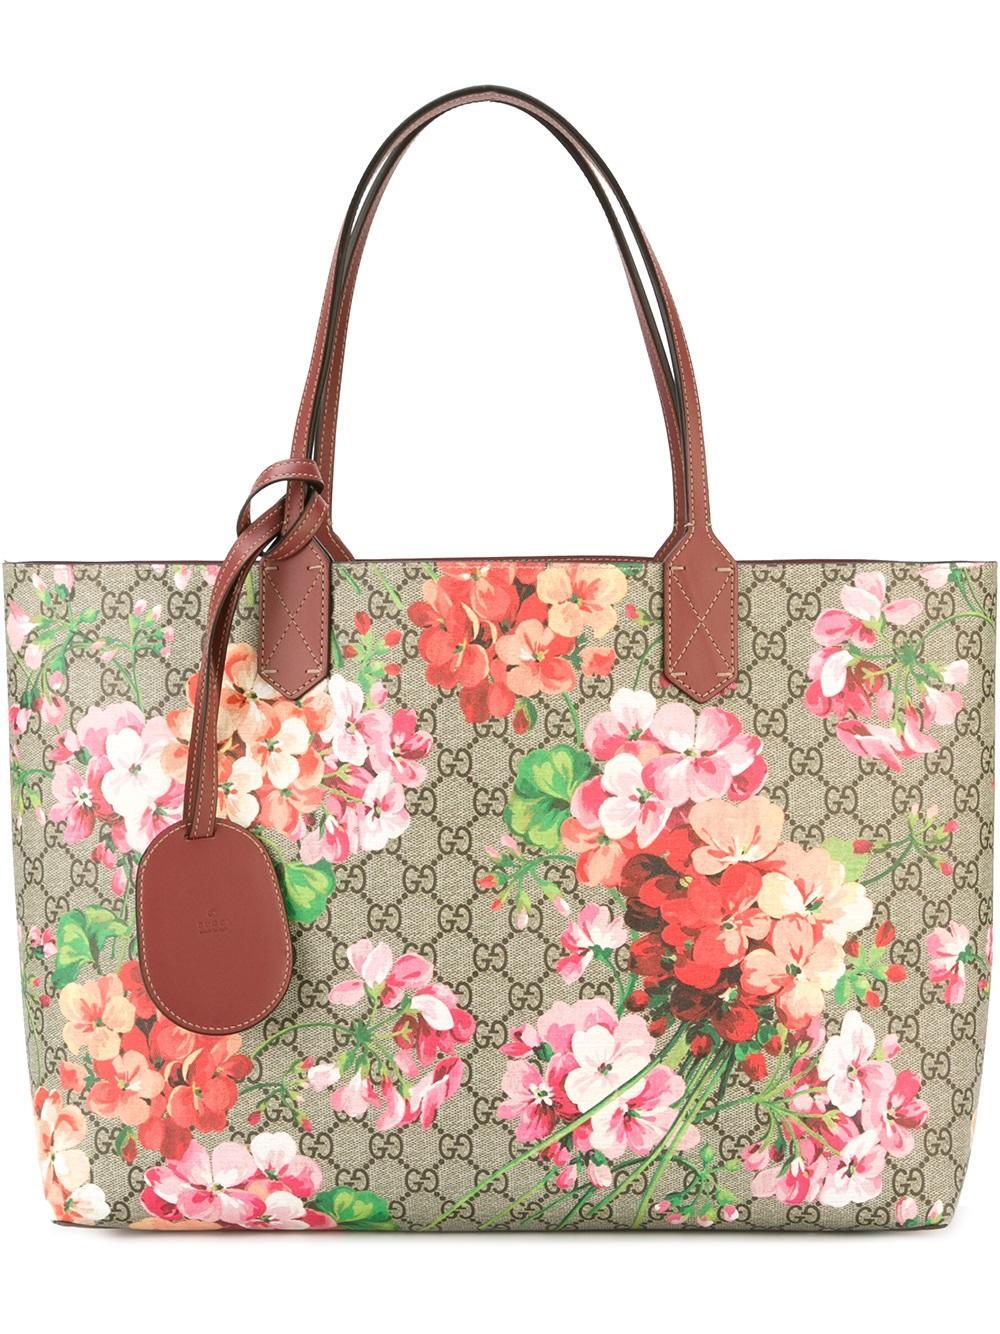 Lyst - Gucci Gg Blooms Supreme Tote Bag in Brown